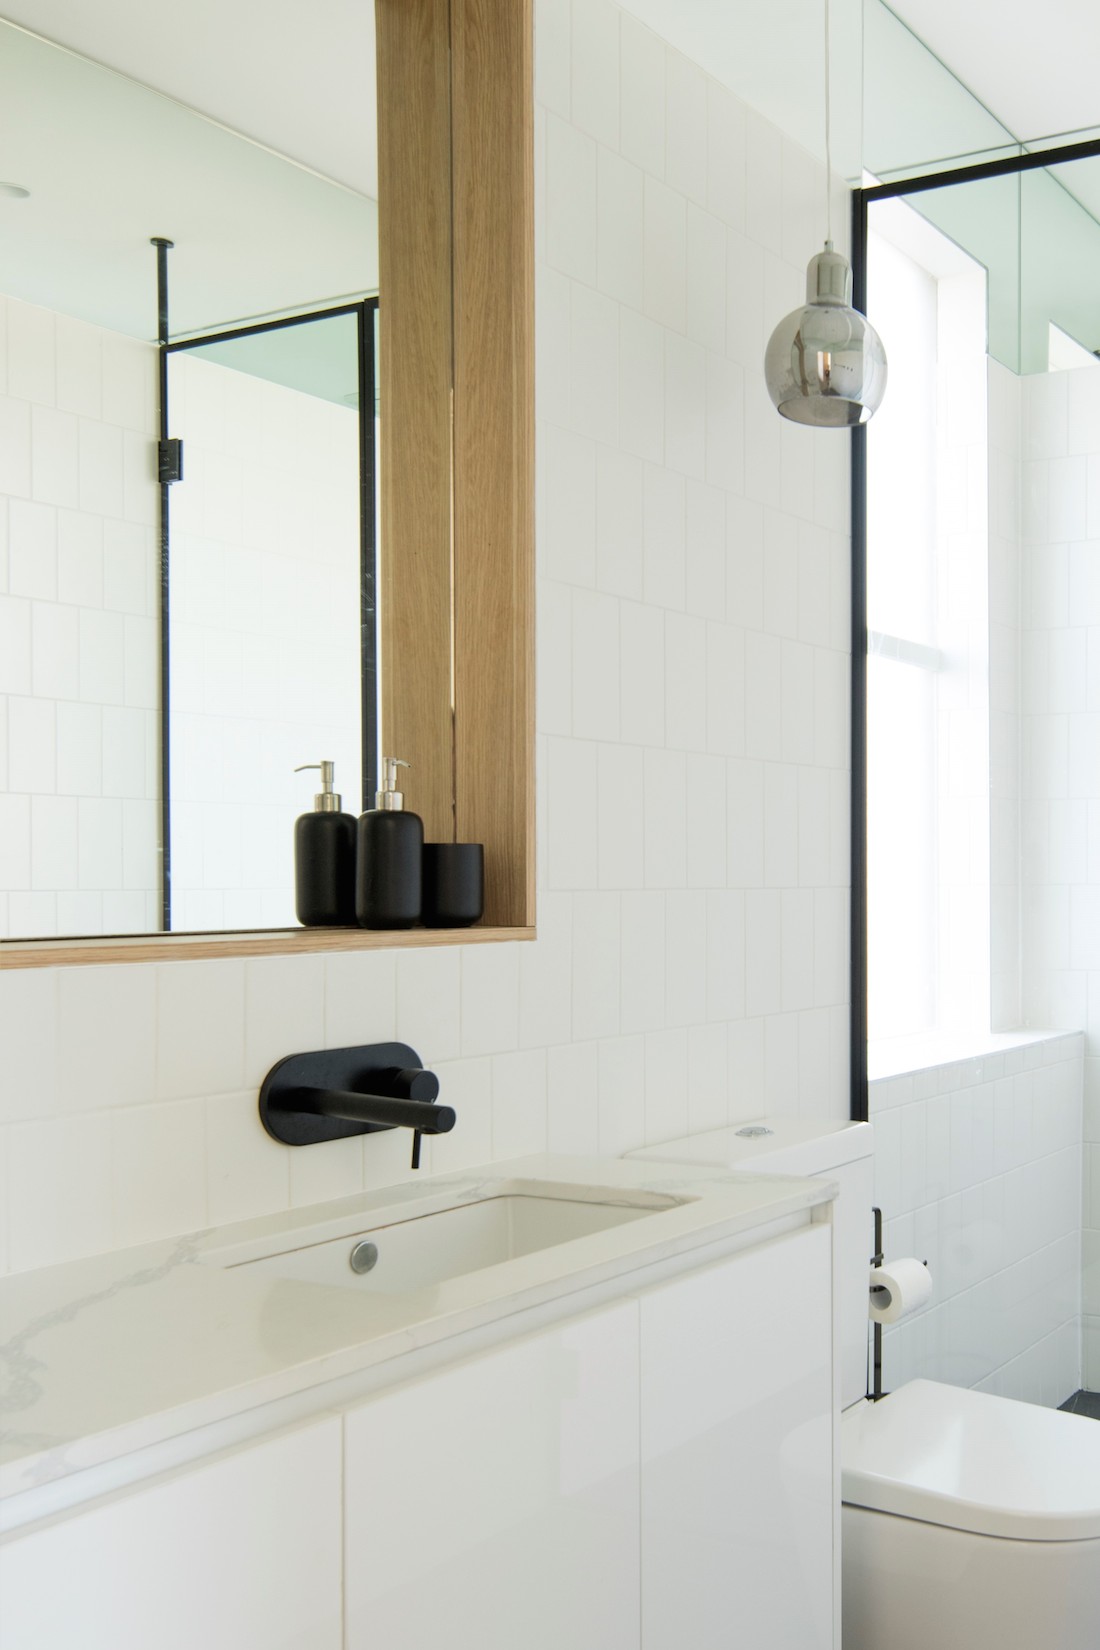 Ensuite features in tight heritage townhouse